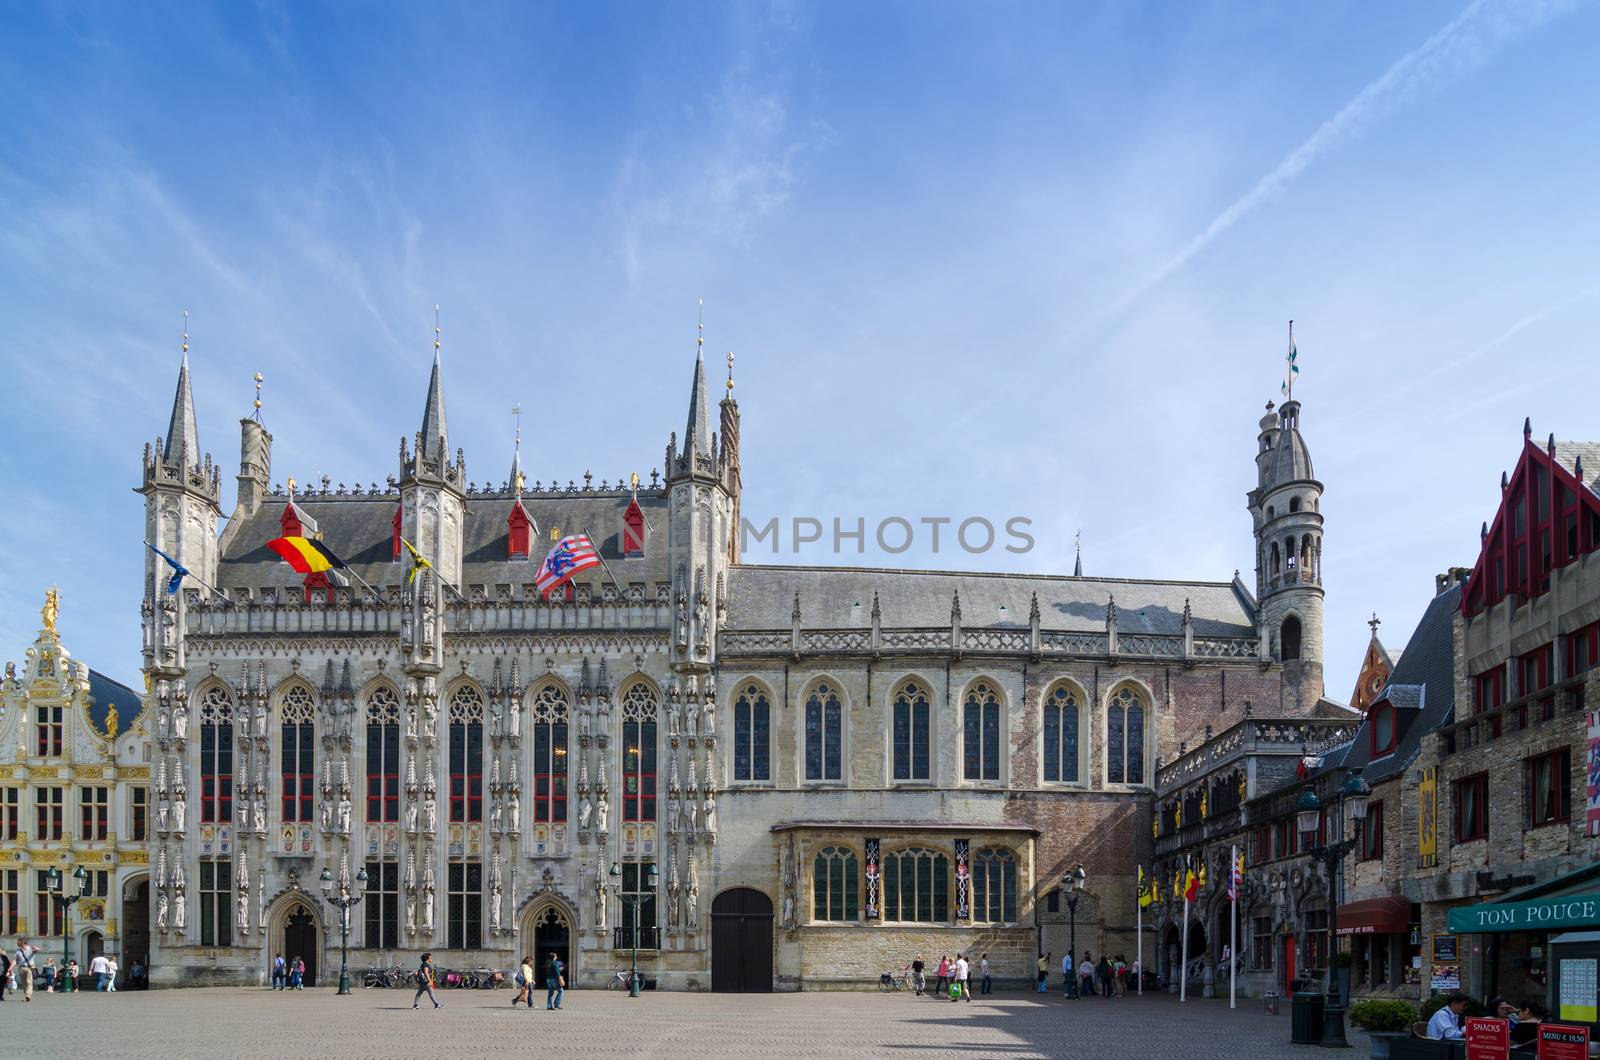 Bruges, Belgium - May 11, 2015: Tourist on Burg square with City Hall and Basilica of the Holy Blood in Bruges by siraanamwong